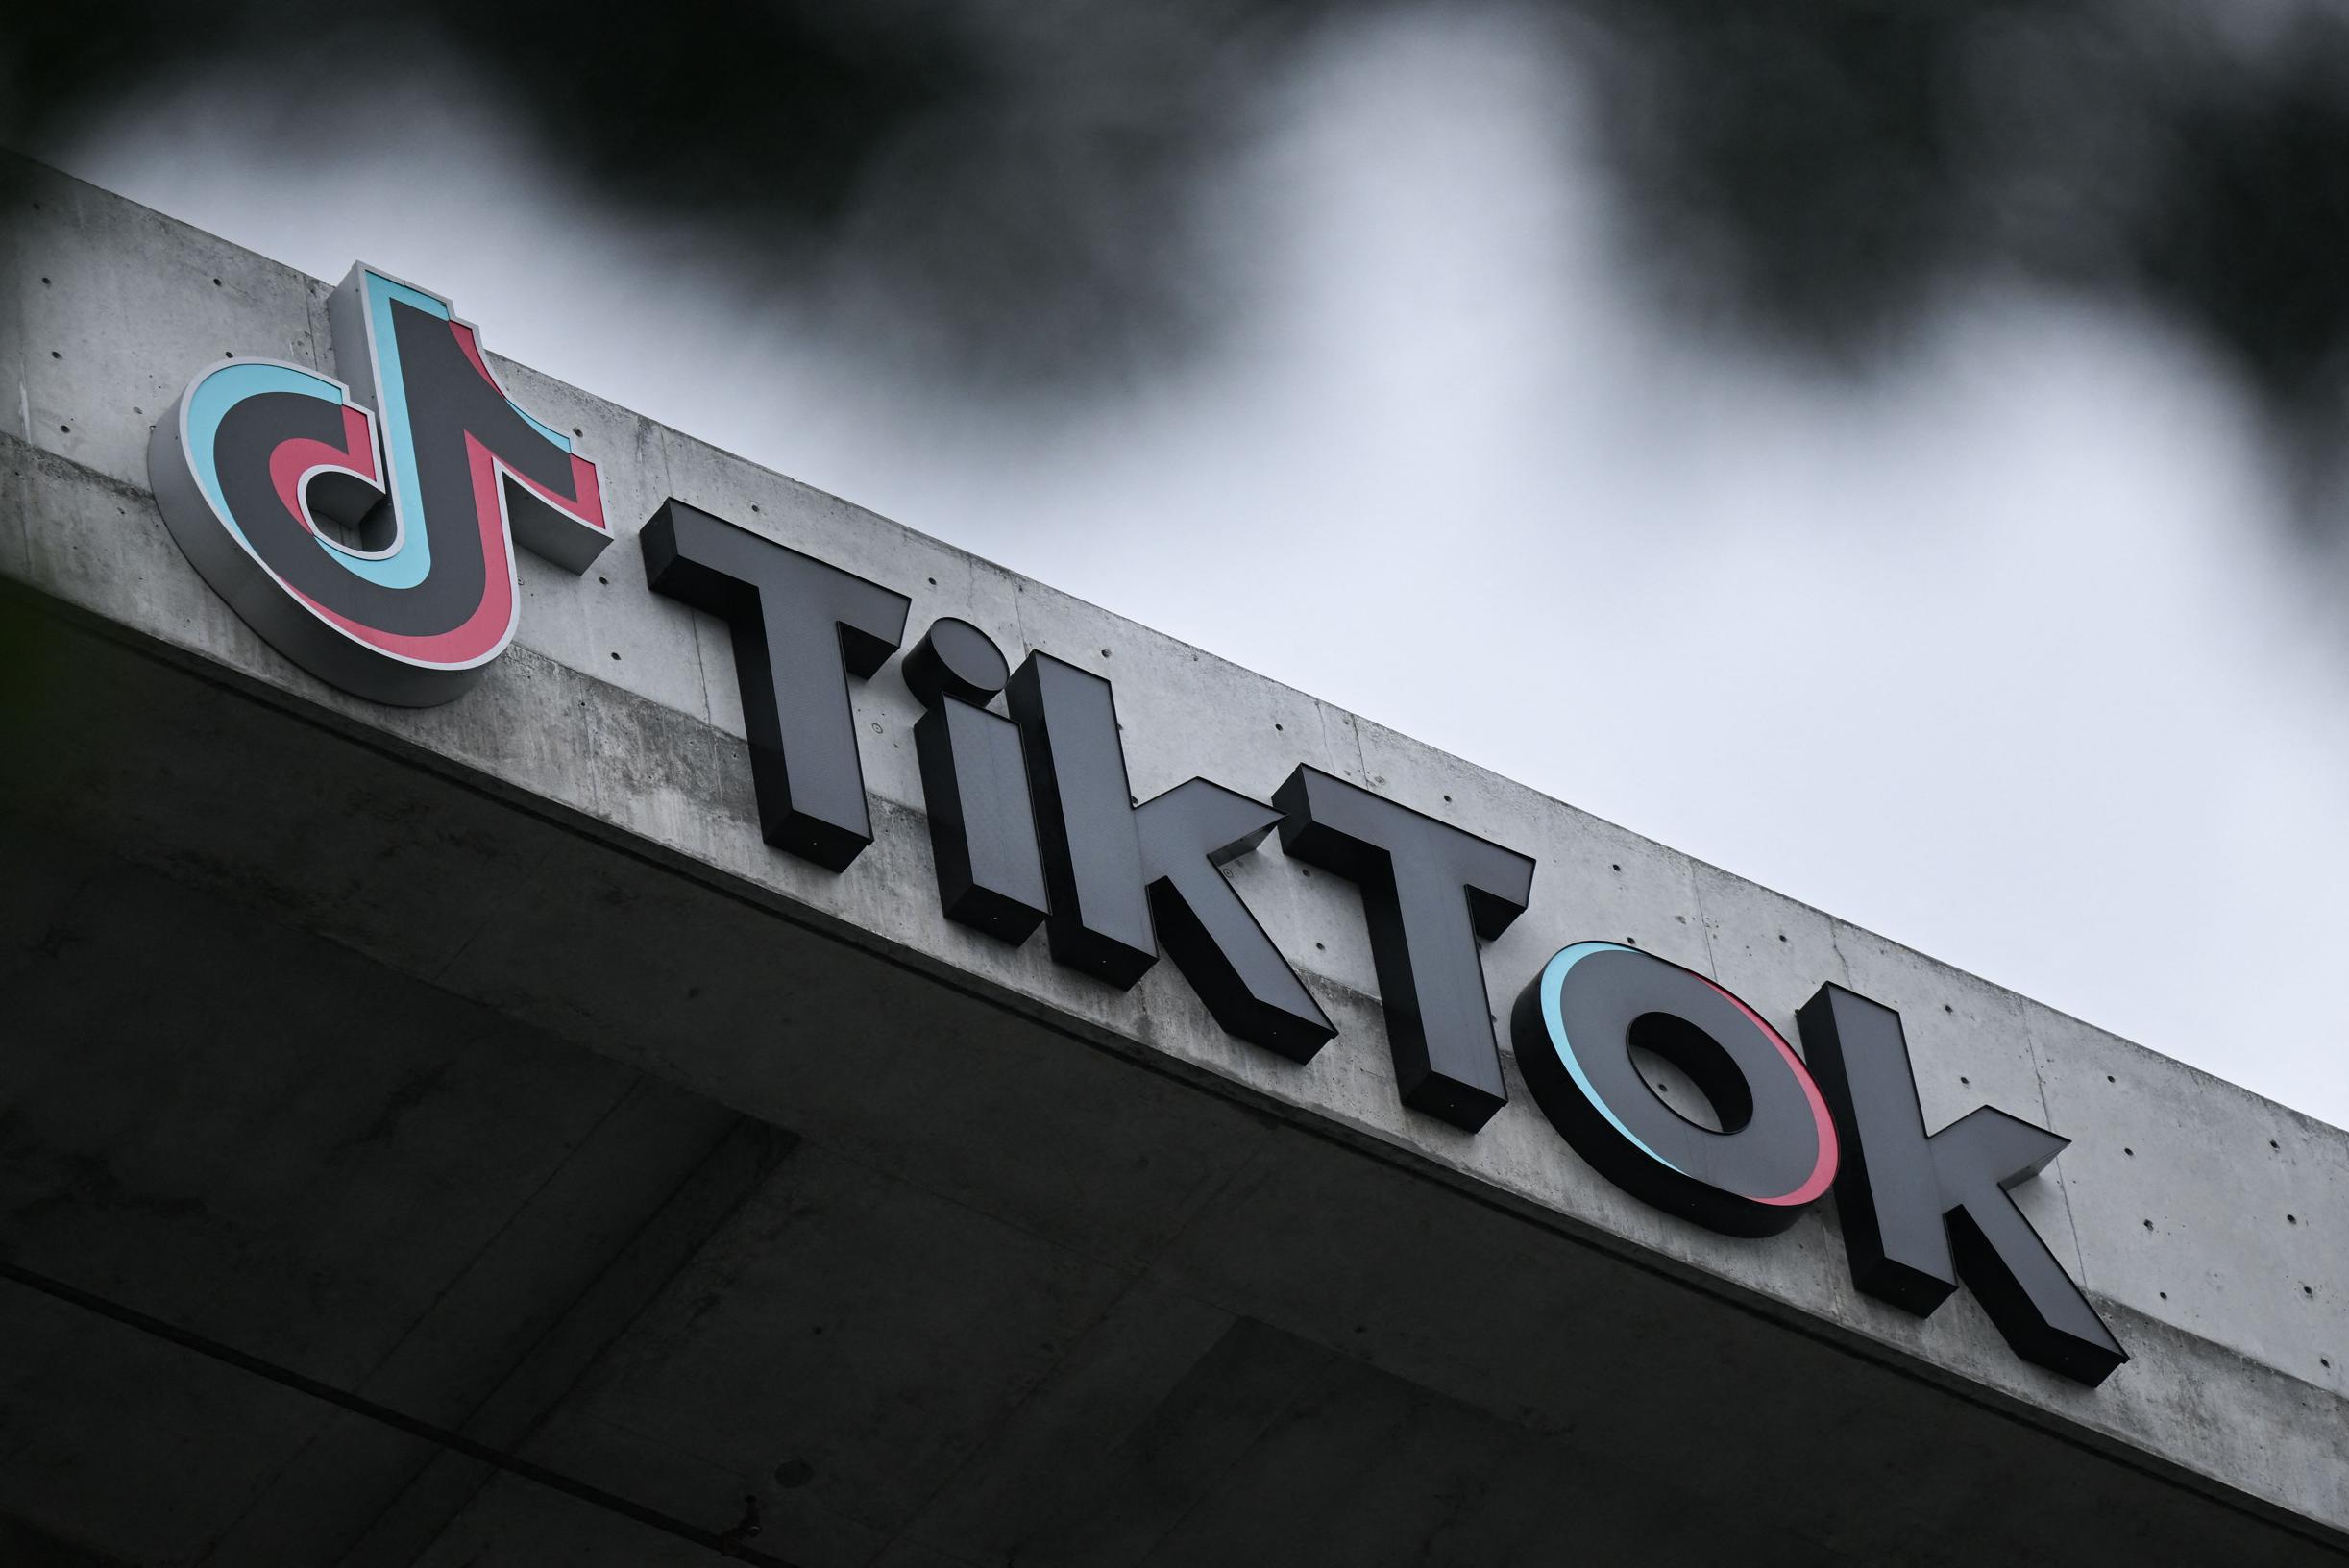 Italy fines Tiktok 10 million euros for insufficiently protecting minors